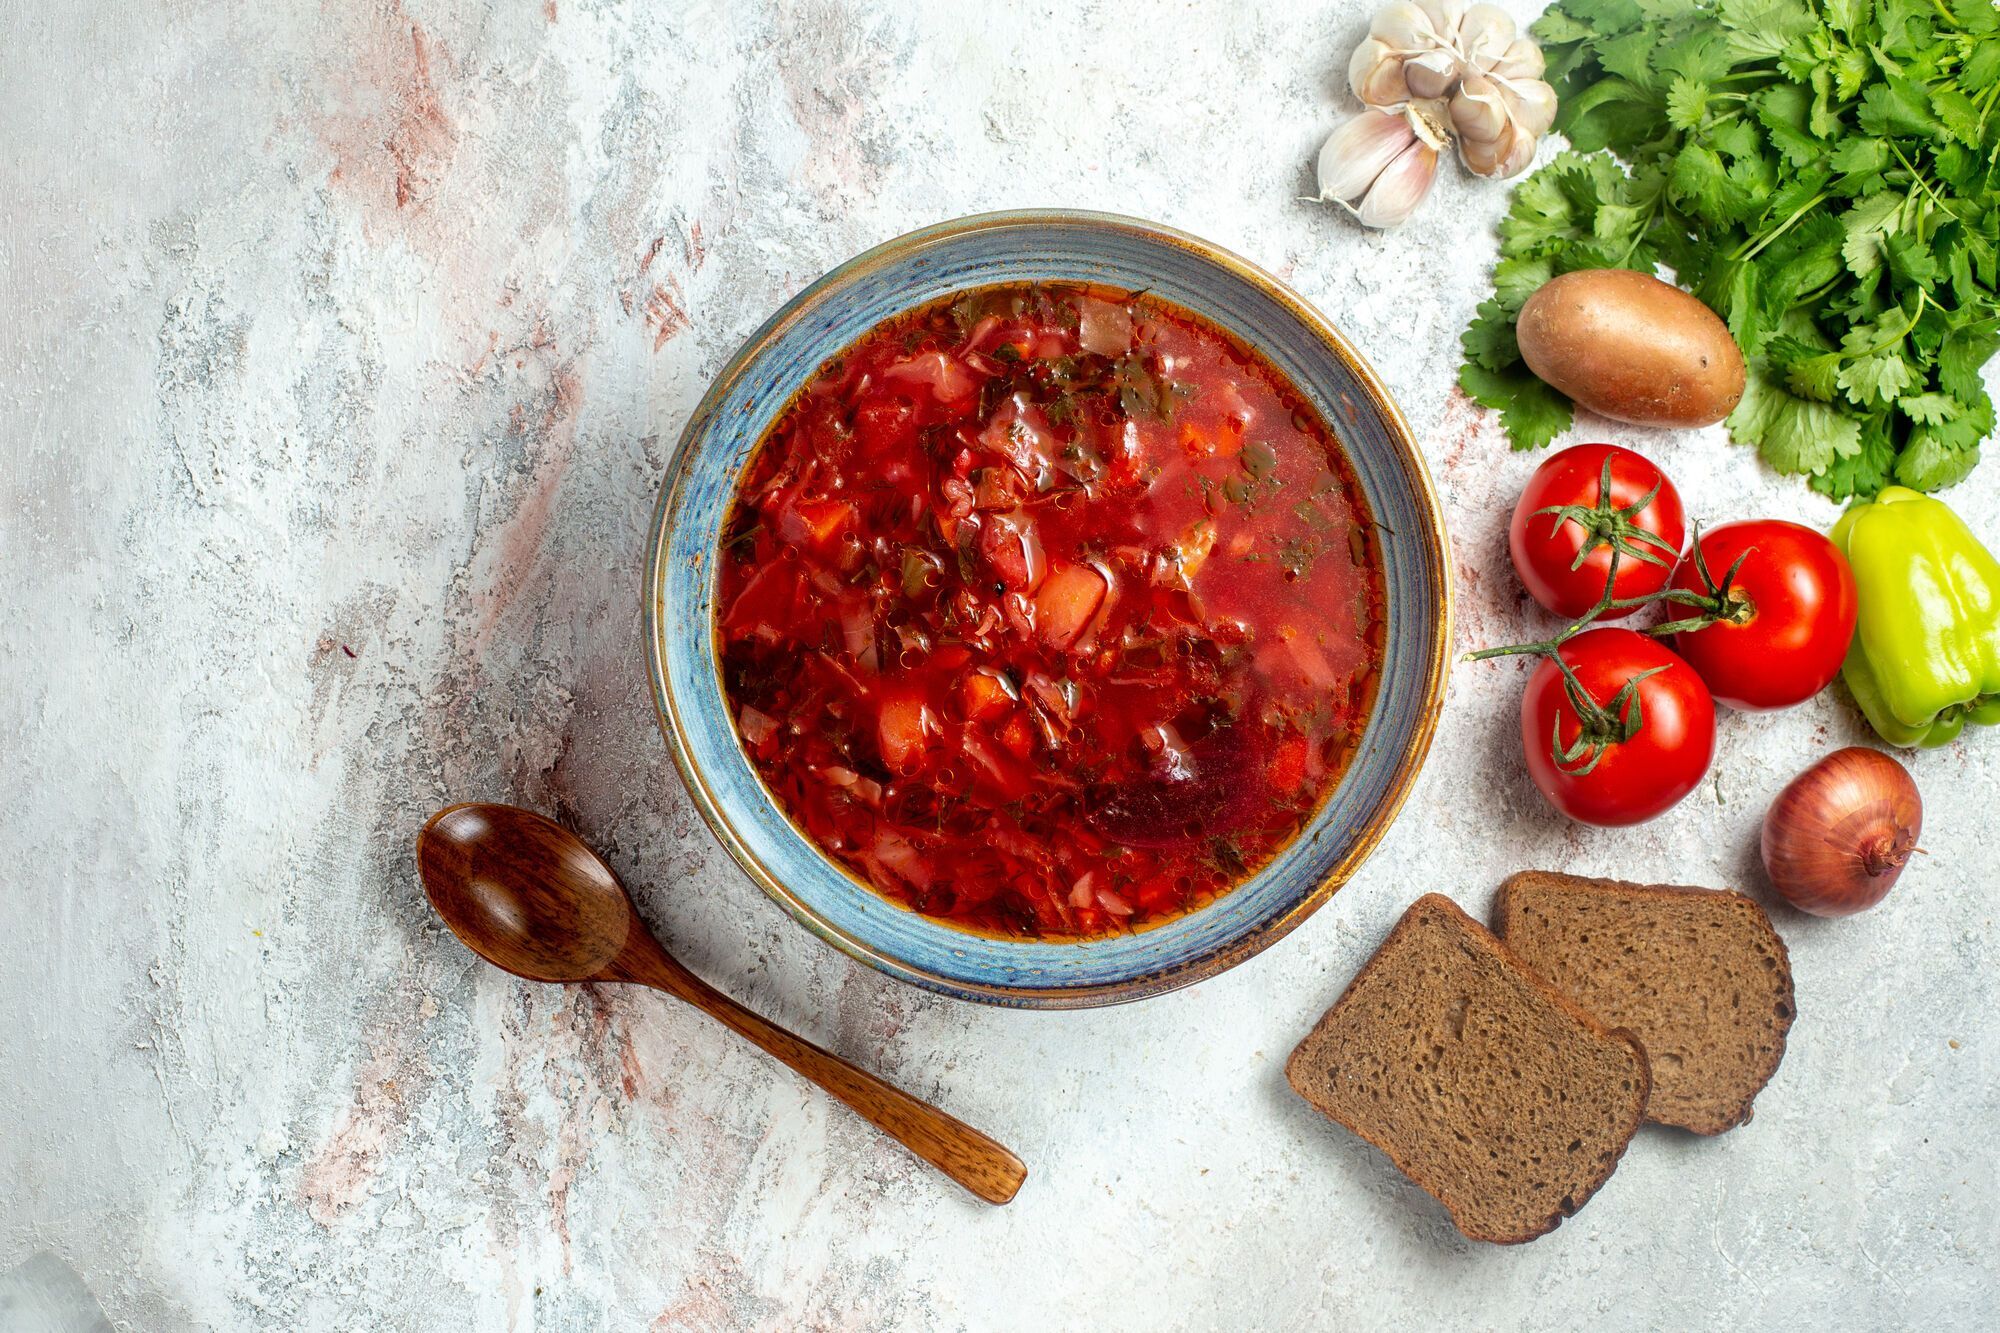 Borscht is very pale and not rich: what mistakes spoil the dish